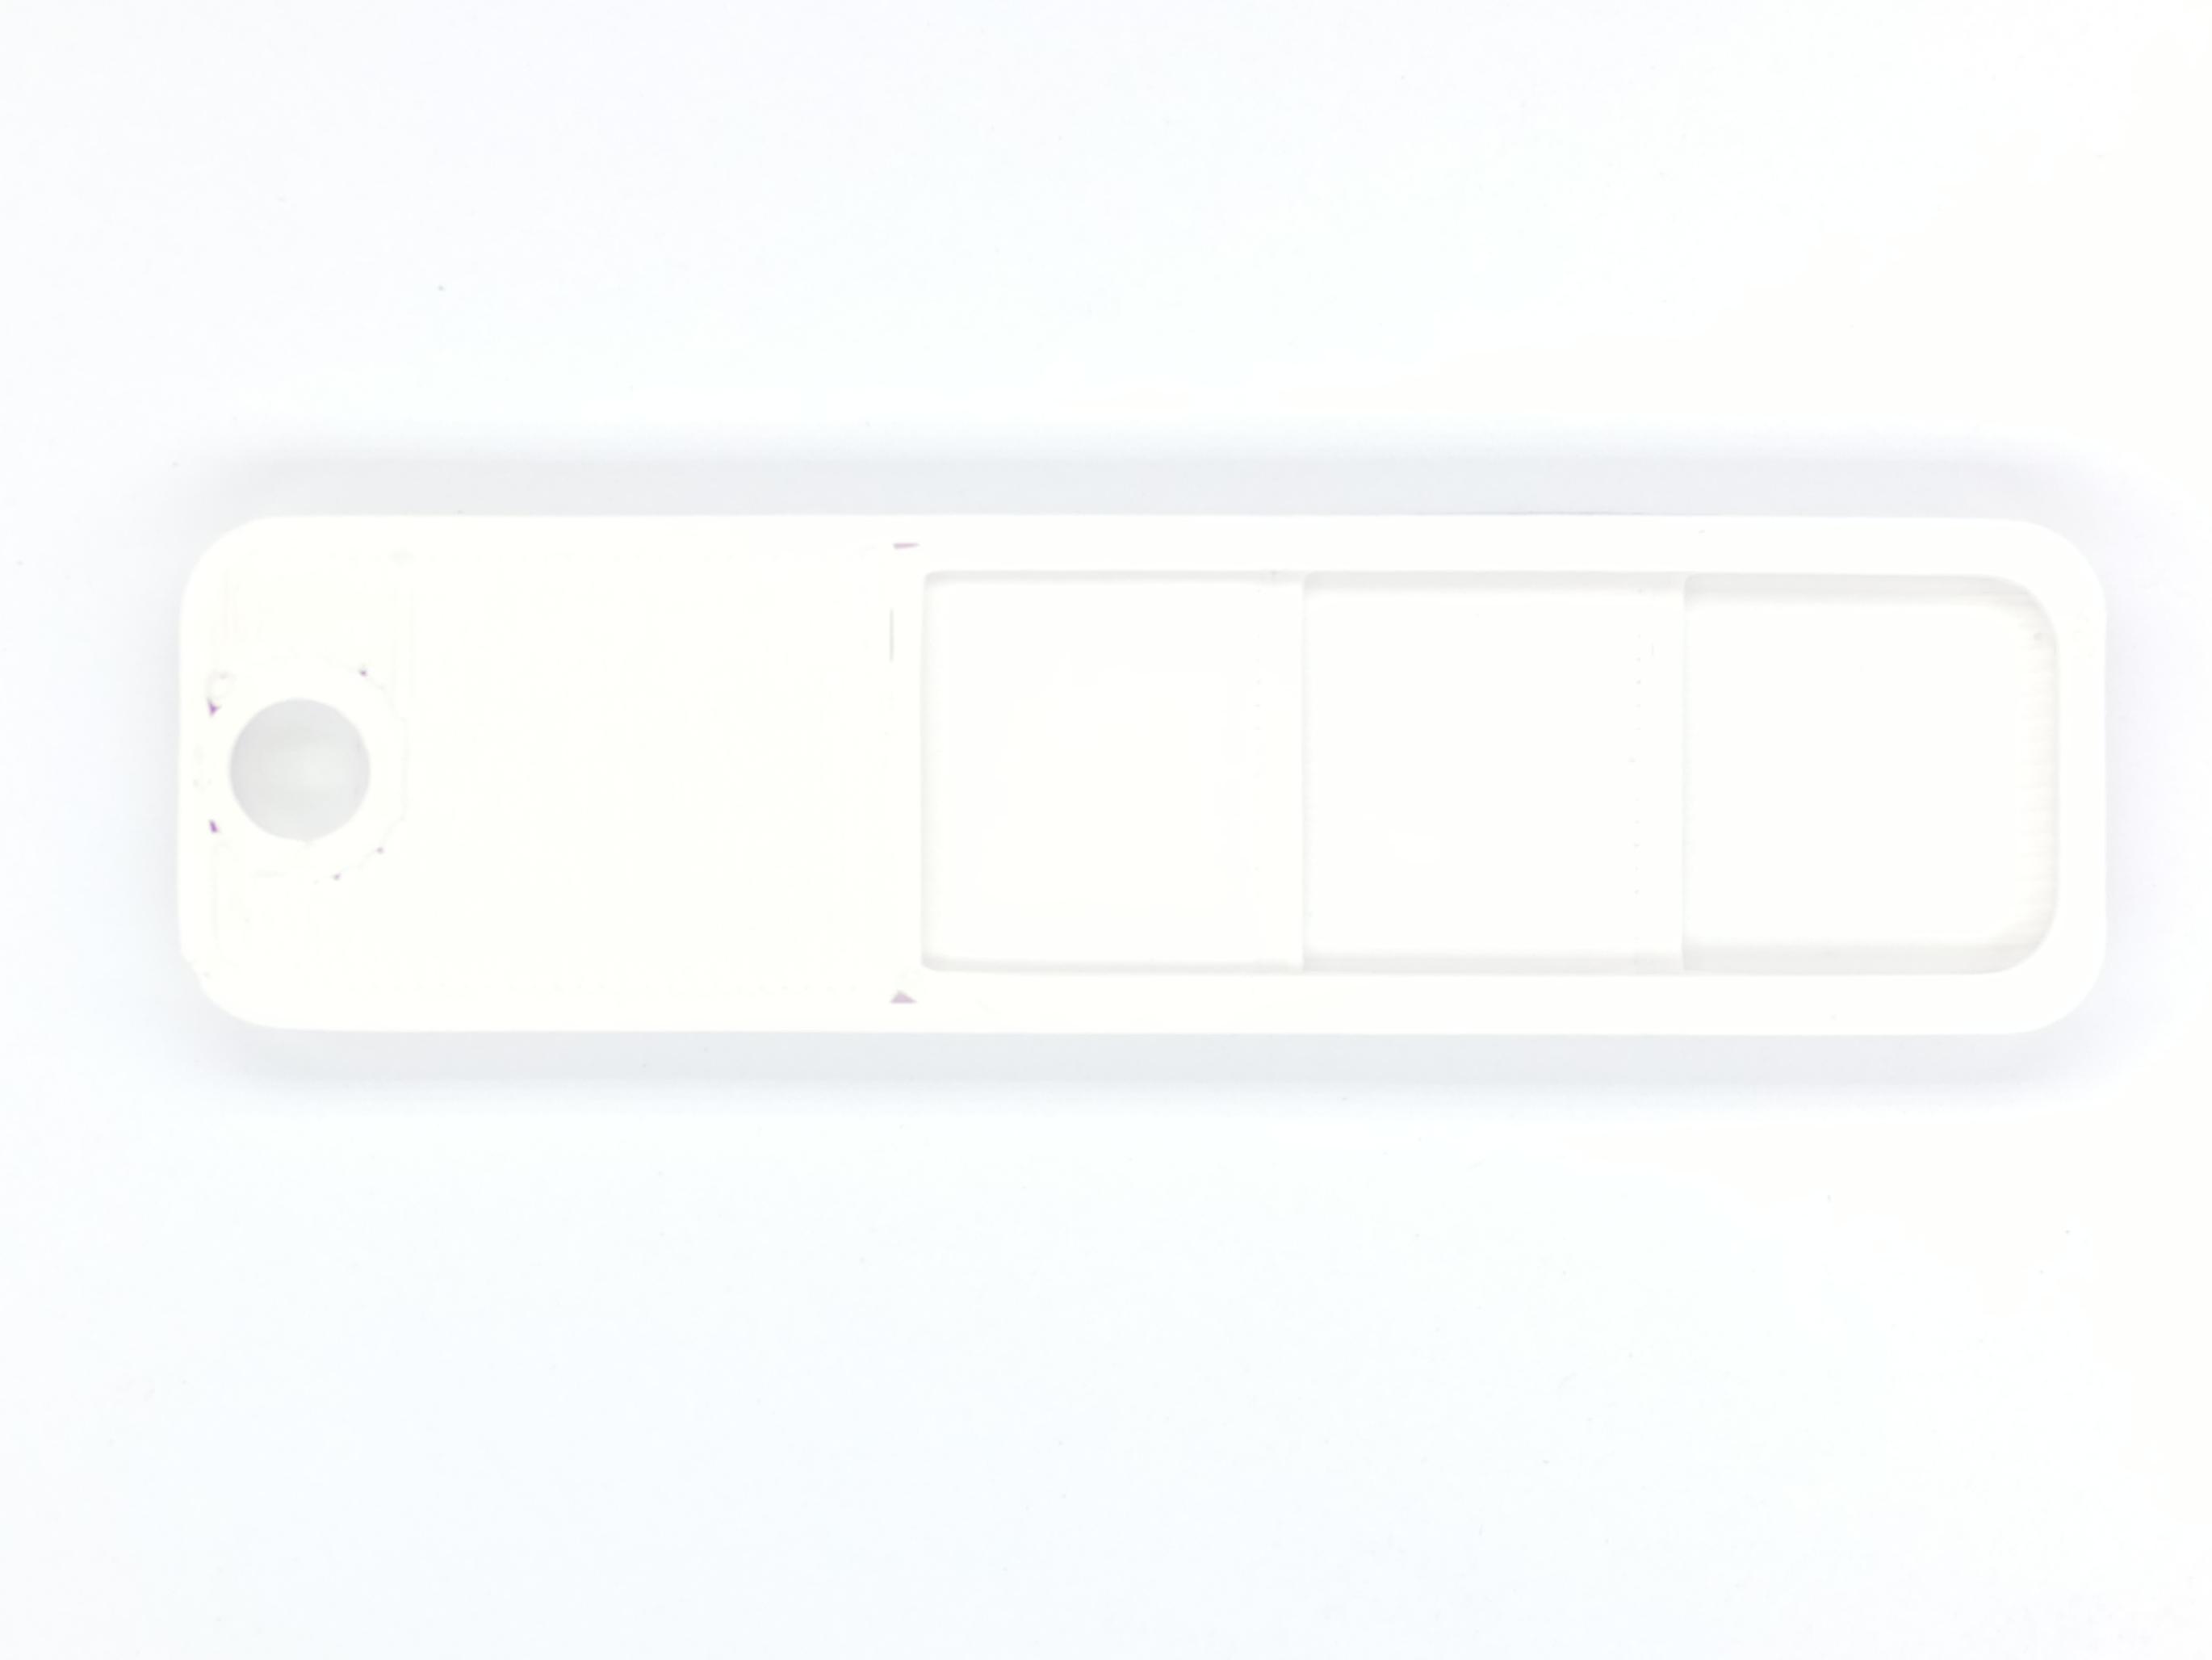 An image of the front of the color swatch.